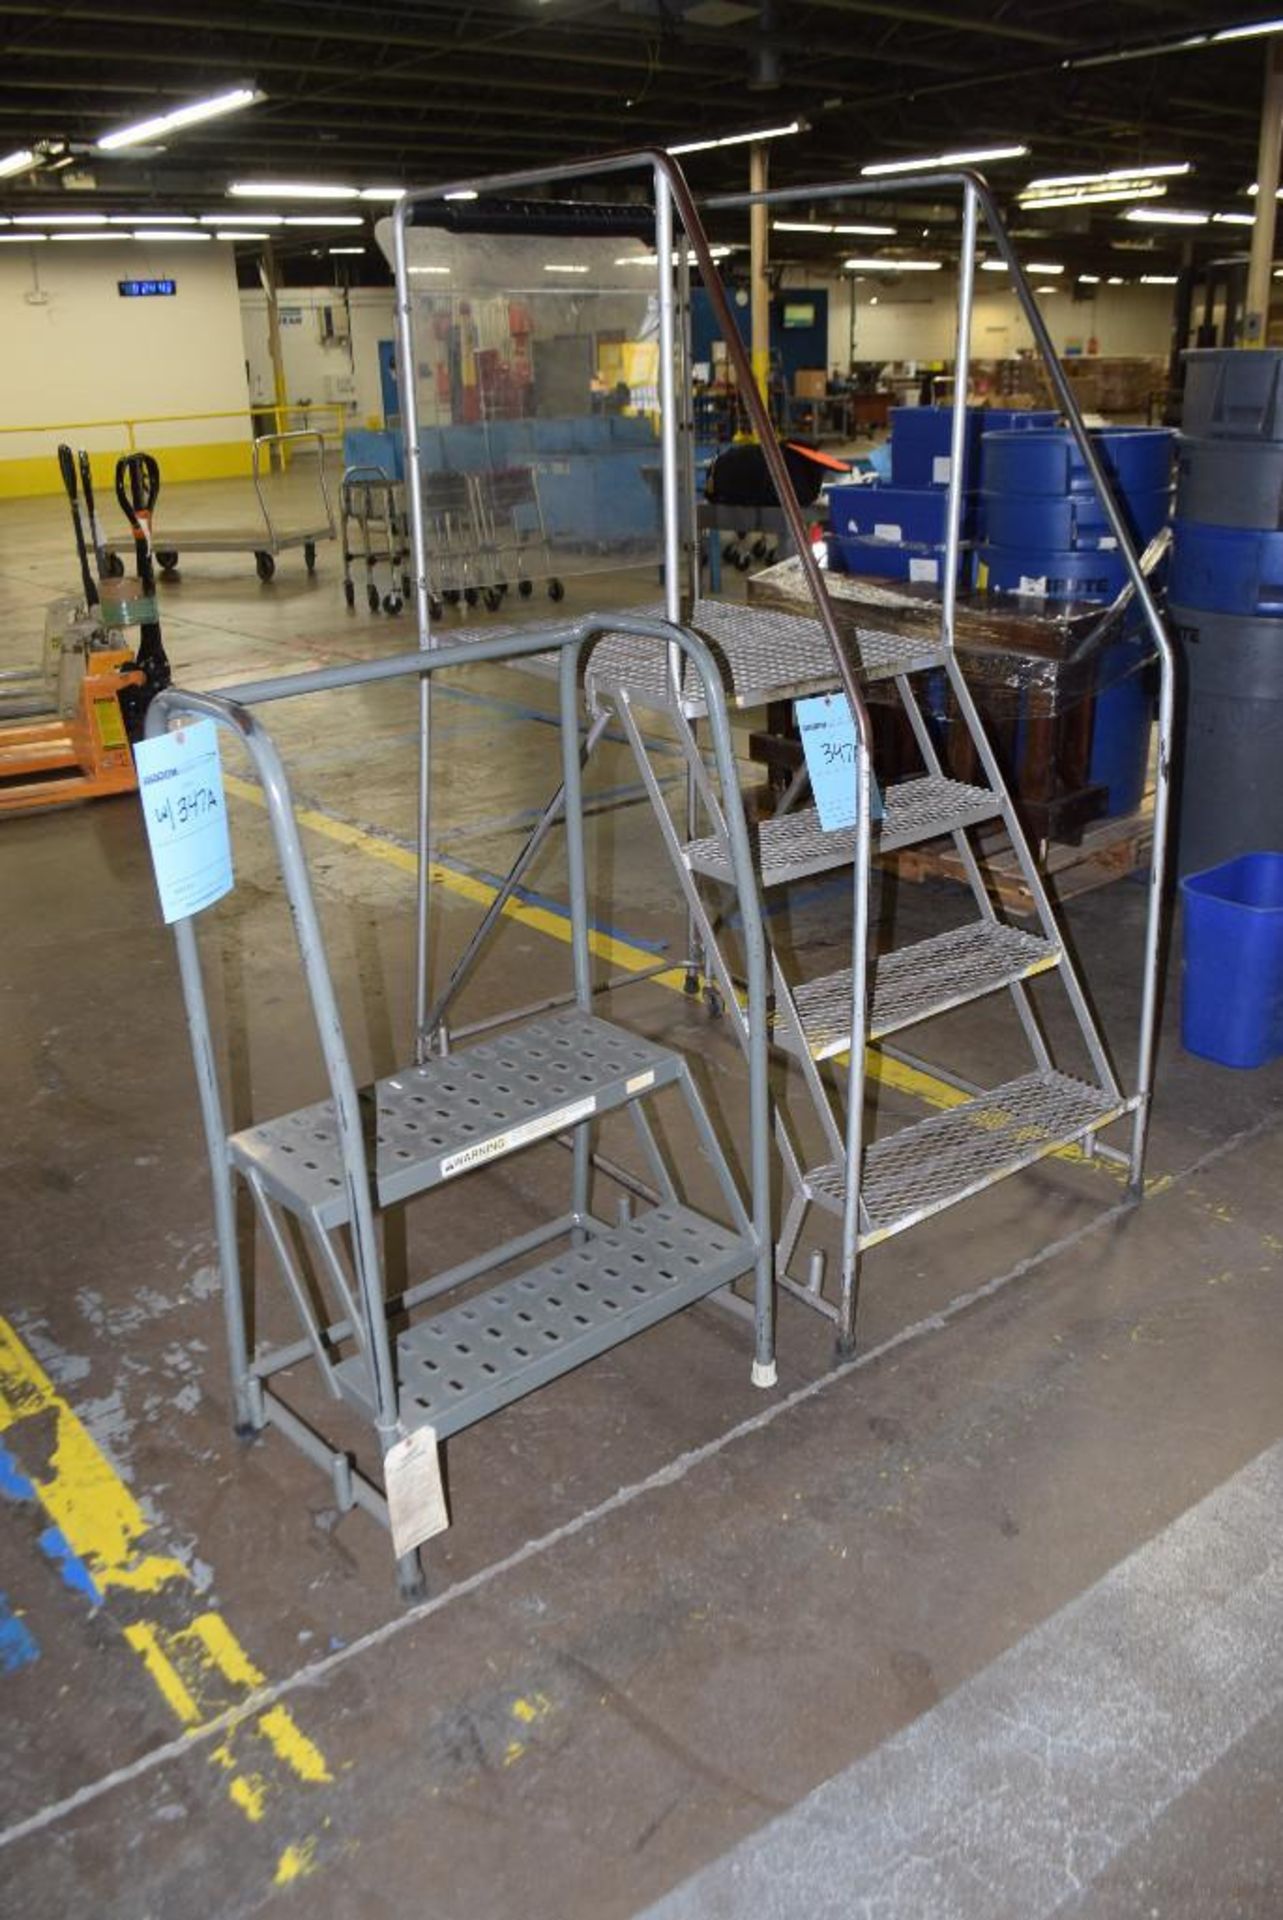 Lot of (2) ladders. (1) portable approximate 4' tall, (1) stationary approximate 2' tall. - Image 2 of 3